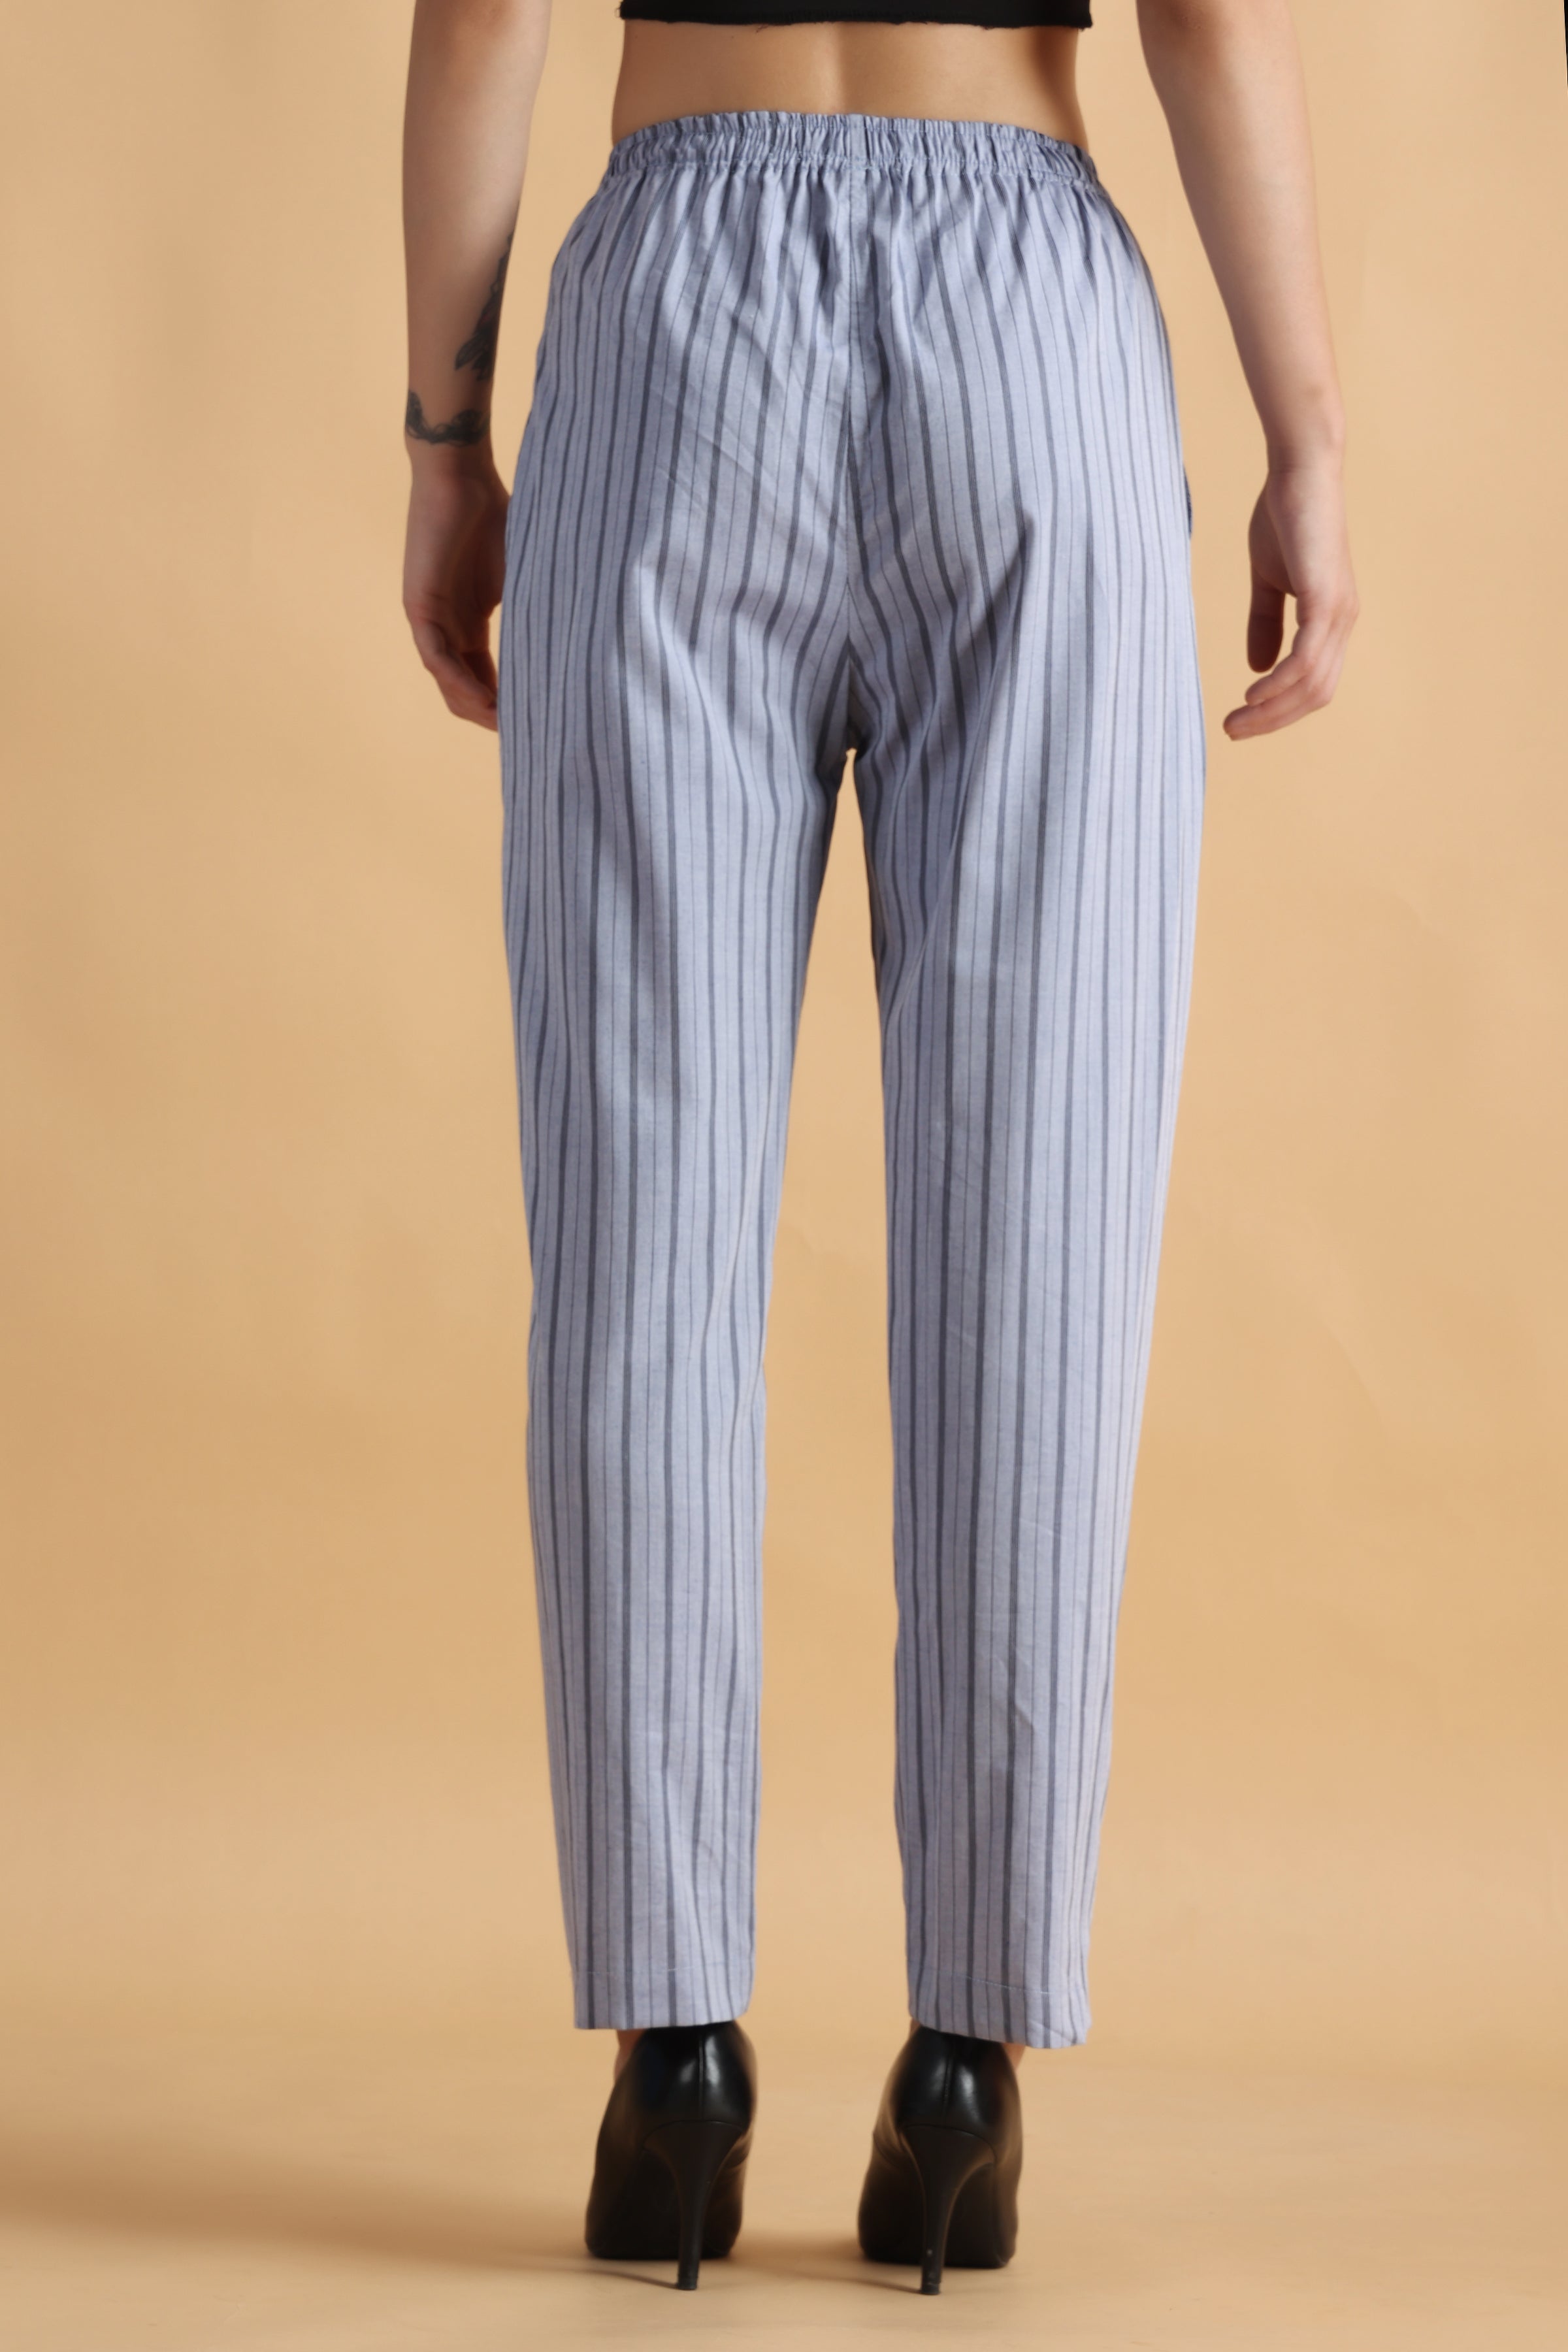 Sojanya Since 1958 Mens Cotton Blend NavyBlue  OffWhite Striped Formal  Trousers